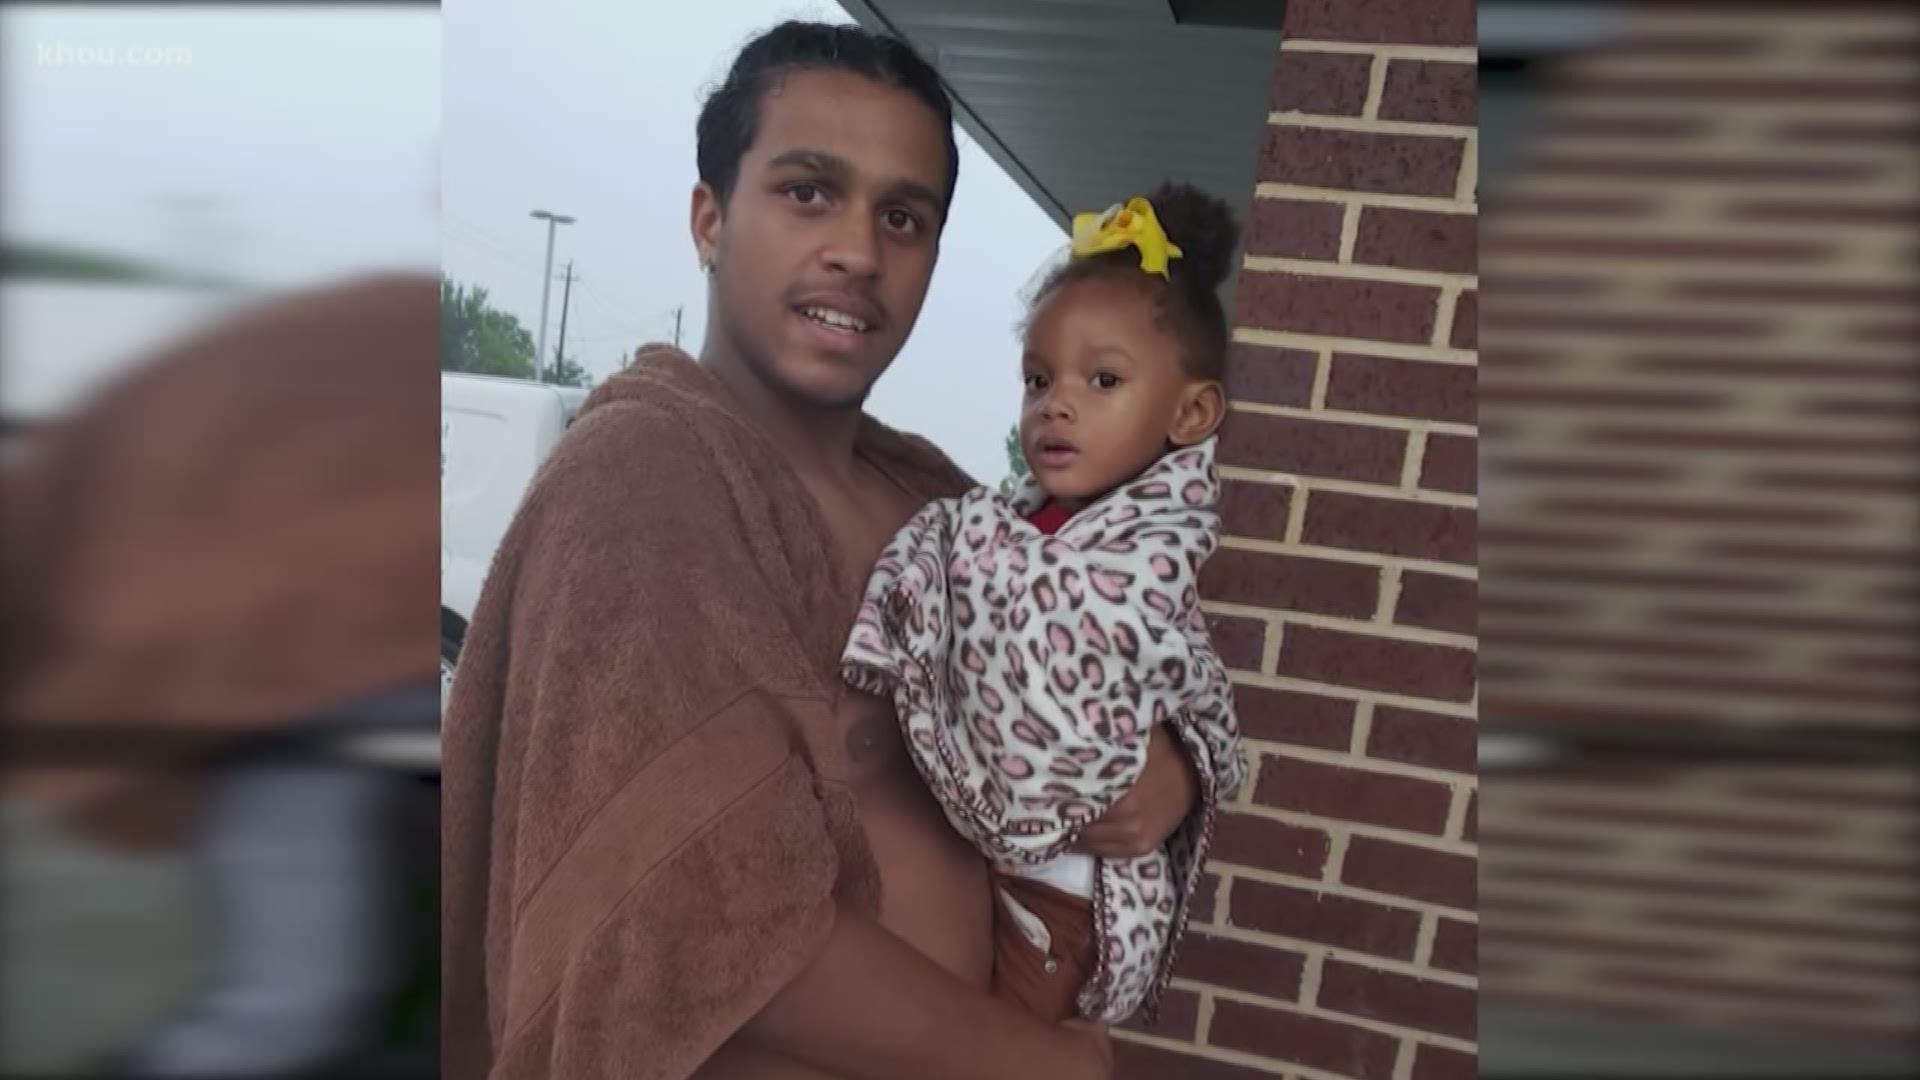 Houston Texans quarterback Deshaun Watson invited the Aldine High School football star who saved a mother and her daughter during Imelda's flooding to a Texans game.